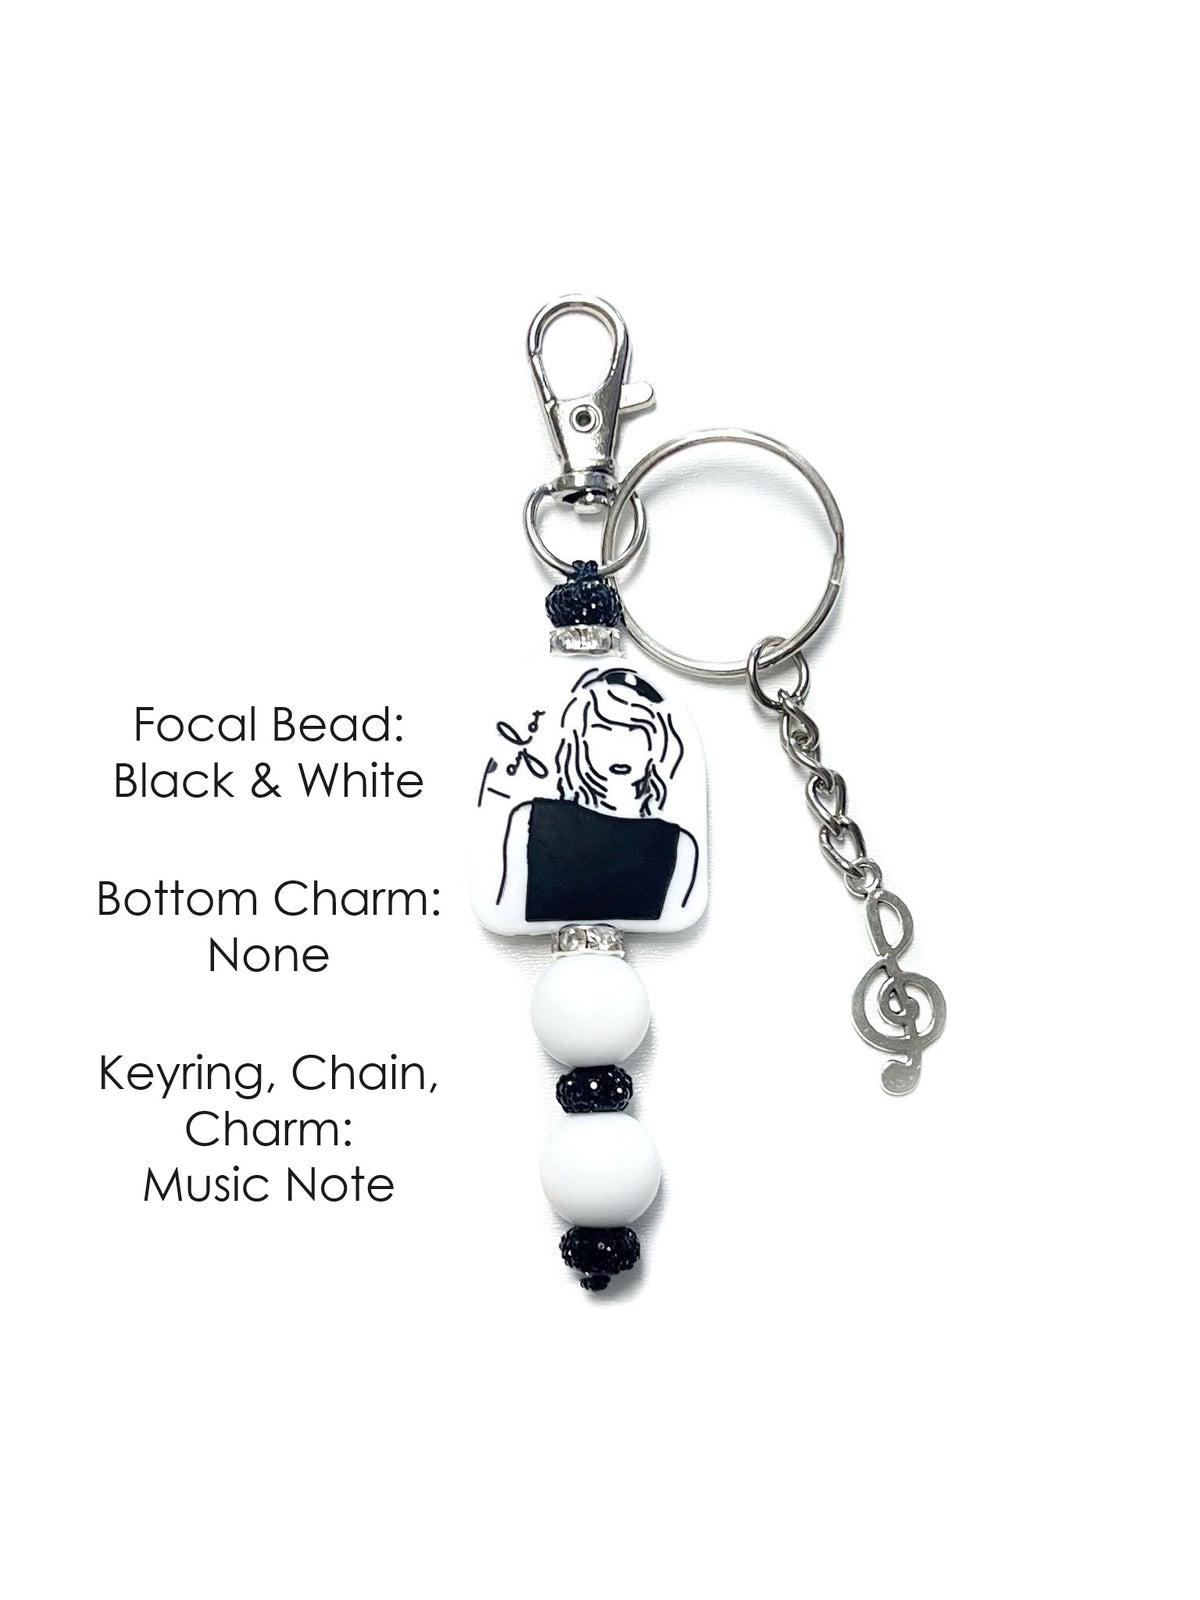 Taylor Swift Keychain Keyring Options Swiftie Lobster Claw Clasp, Split Keyring, Charm, Spacer Bead, Accent Bead, Dangle Charm, Hooks and Clasps, and Colors